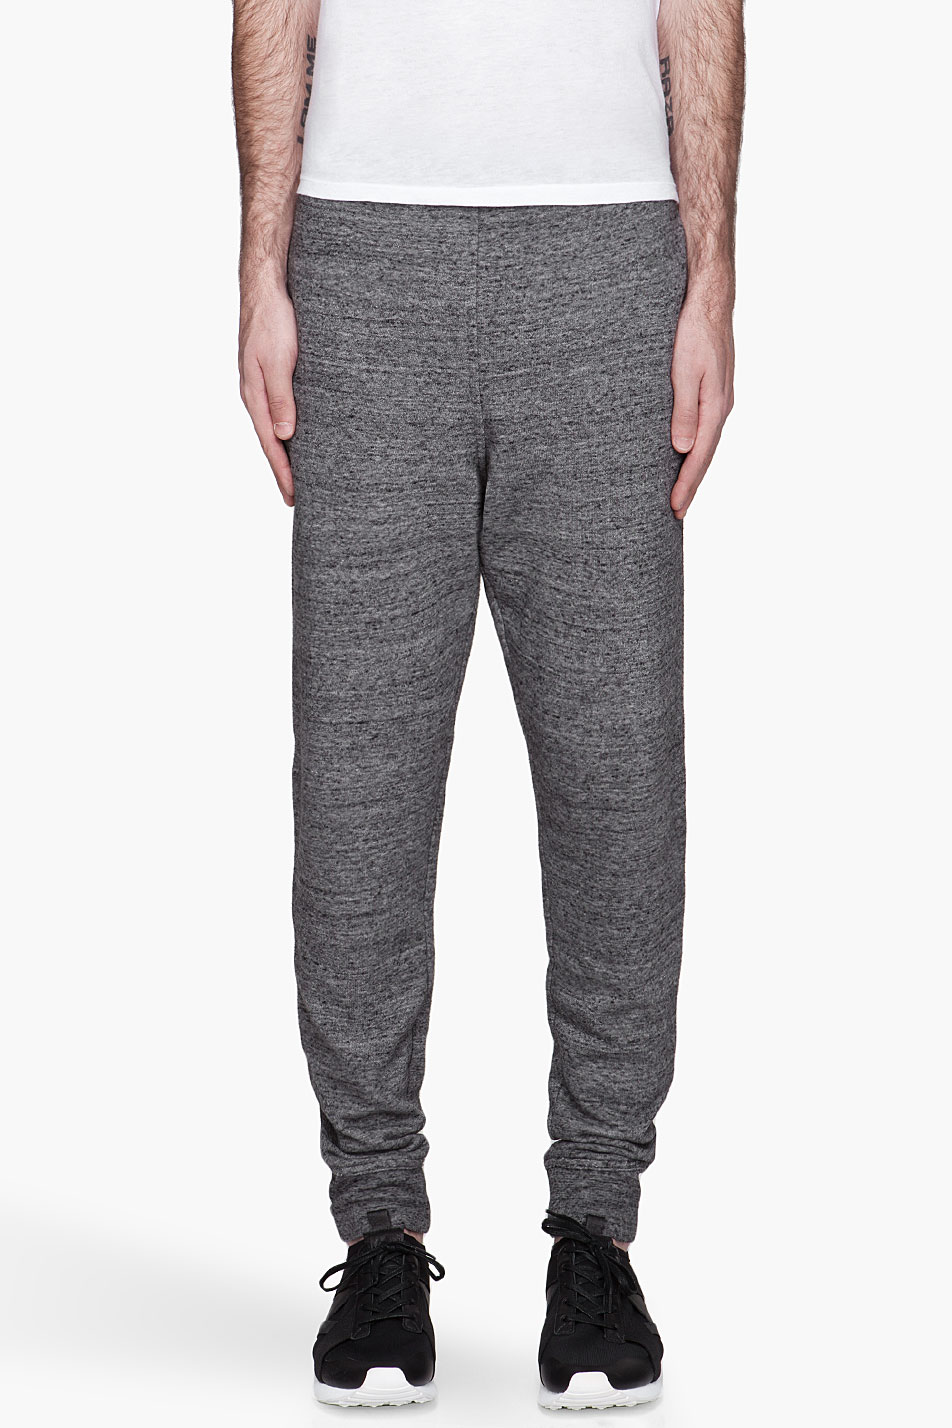 T By Alexander Wang Charcoal Grey Flecked Terry Sweatpants in Gray for ...